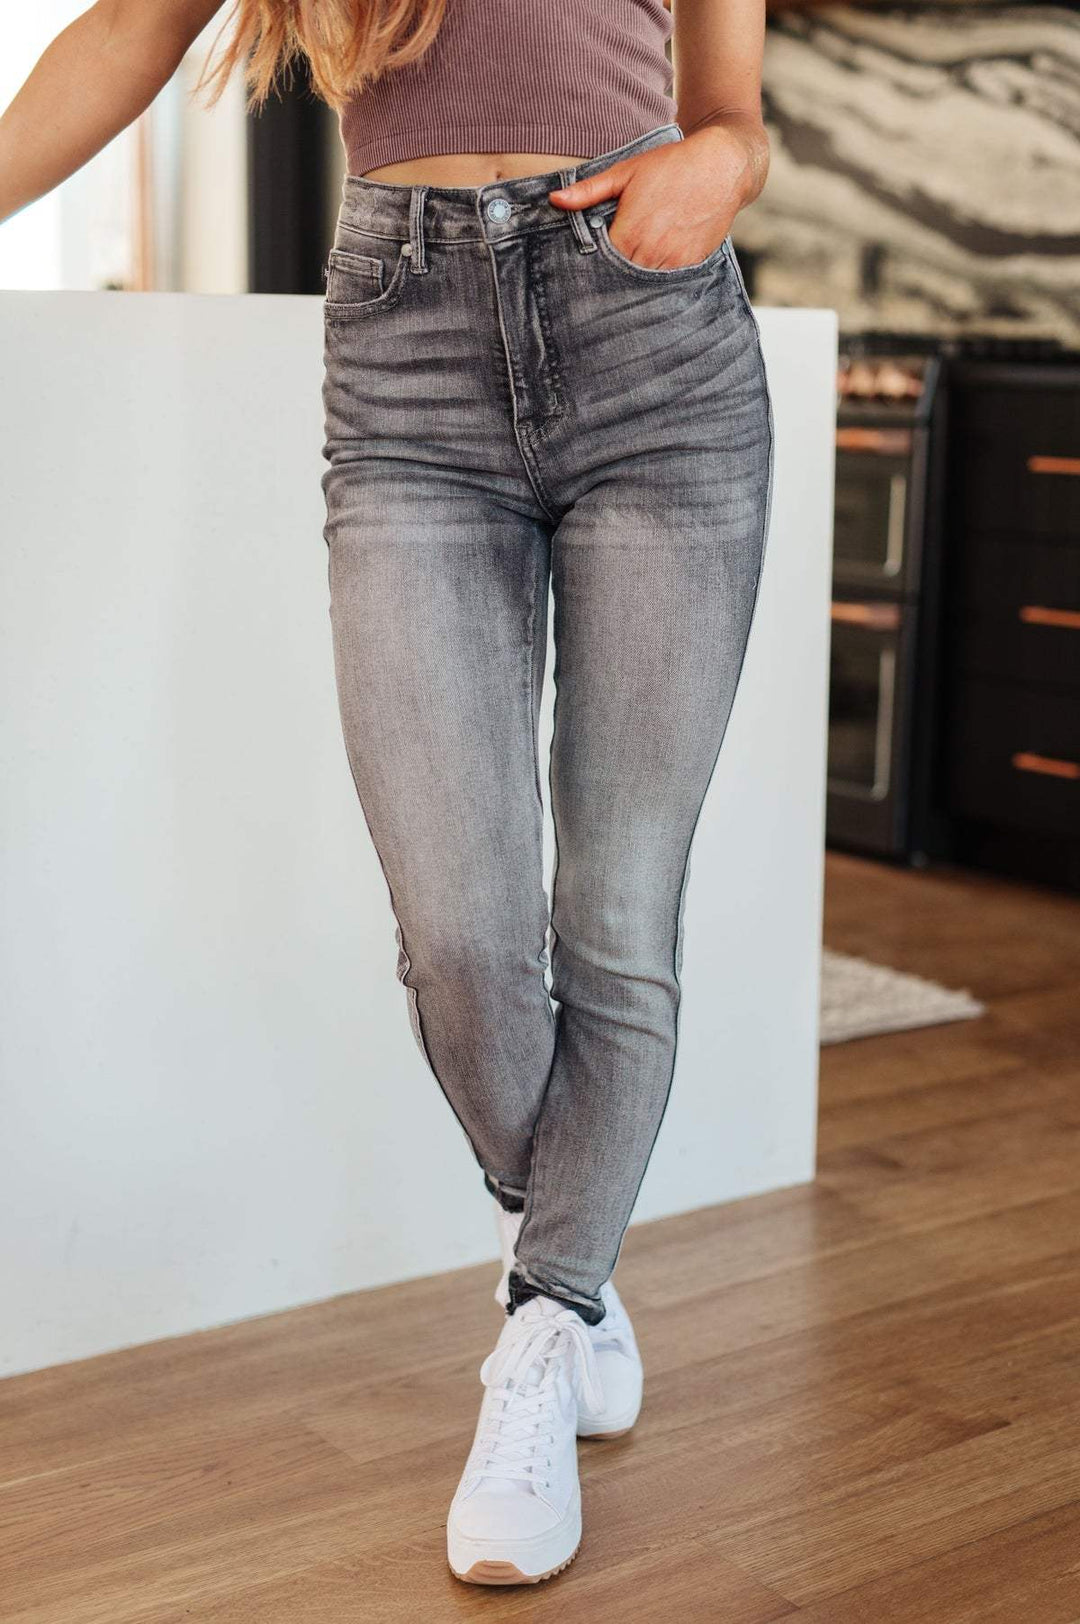 Judy Blue Skinny Jeans - High Rise - Control Top - Released Hem - Inspired Eye Boutique